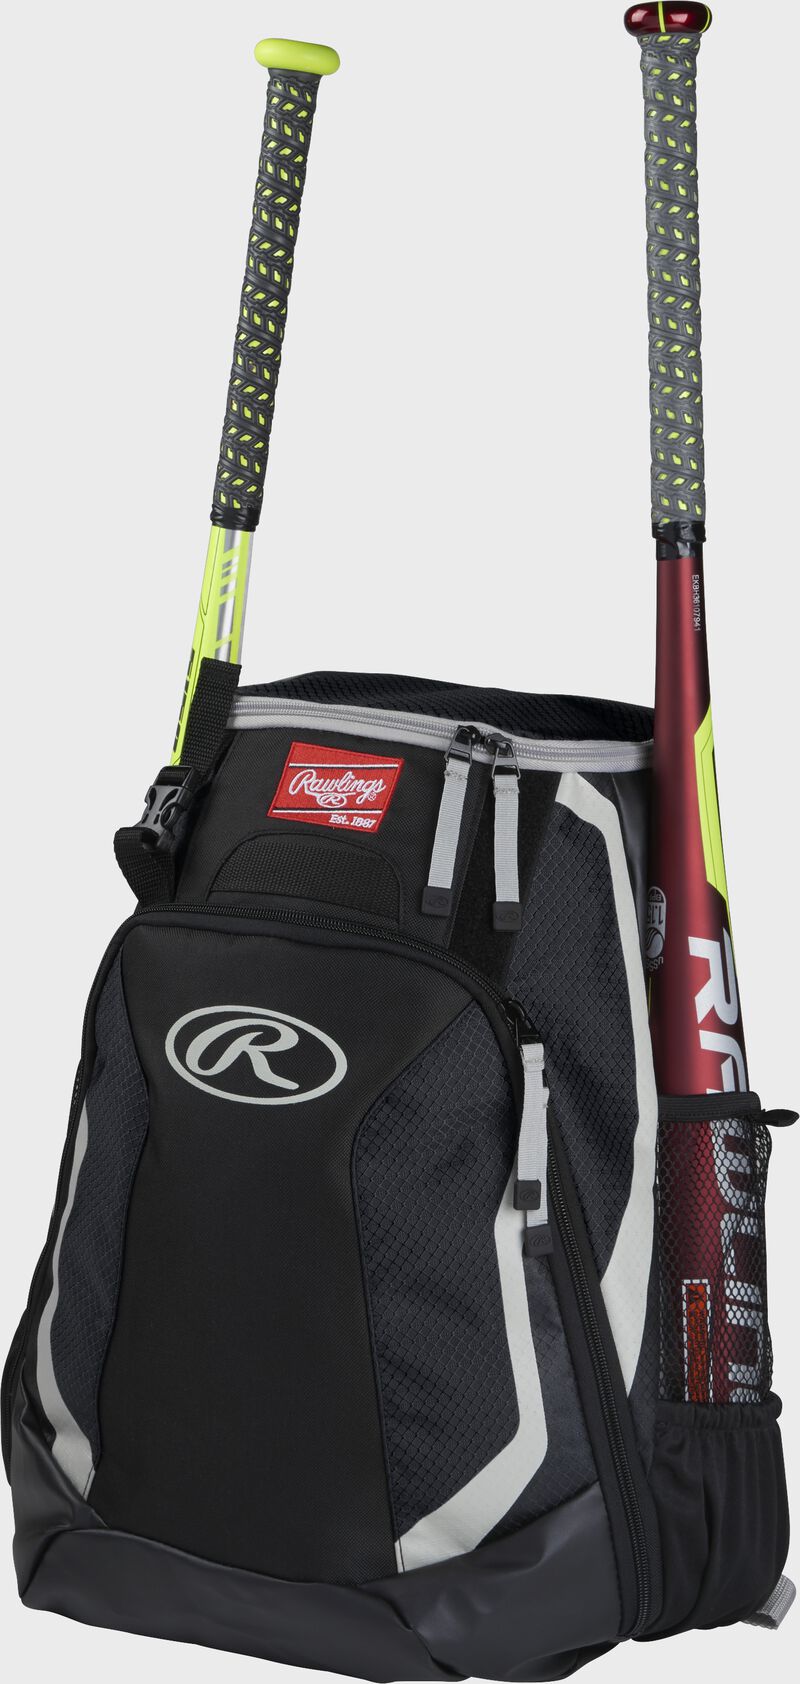 Left side of a black R500 baseball backpack with a red bat in the side sleeve